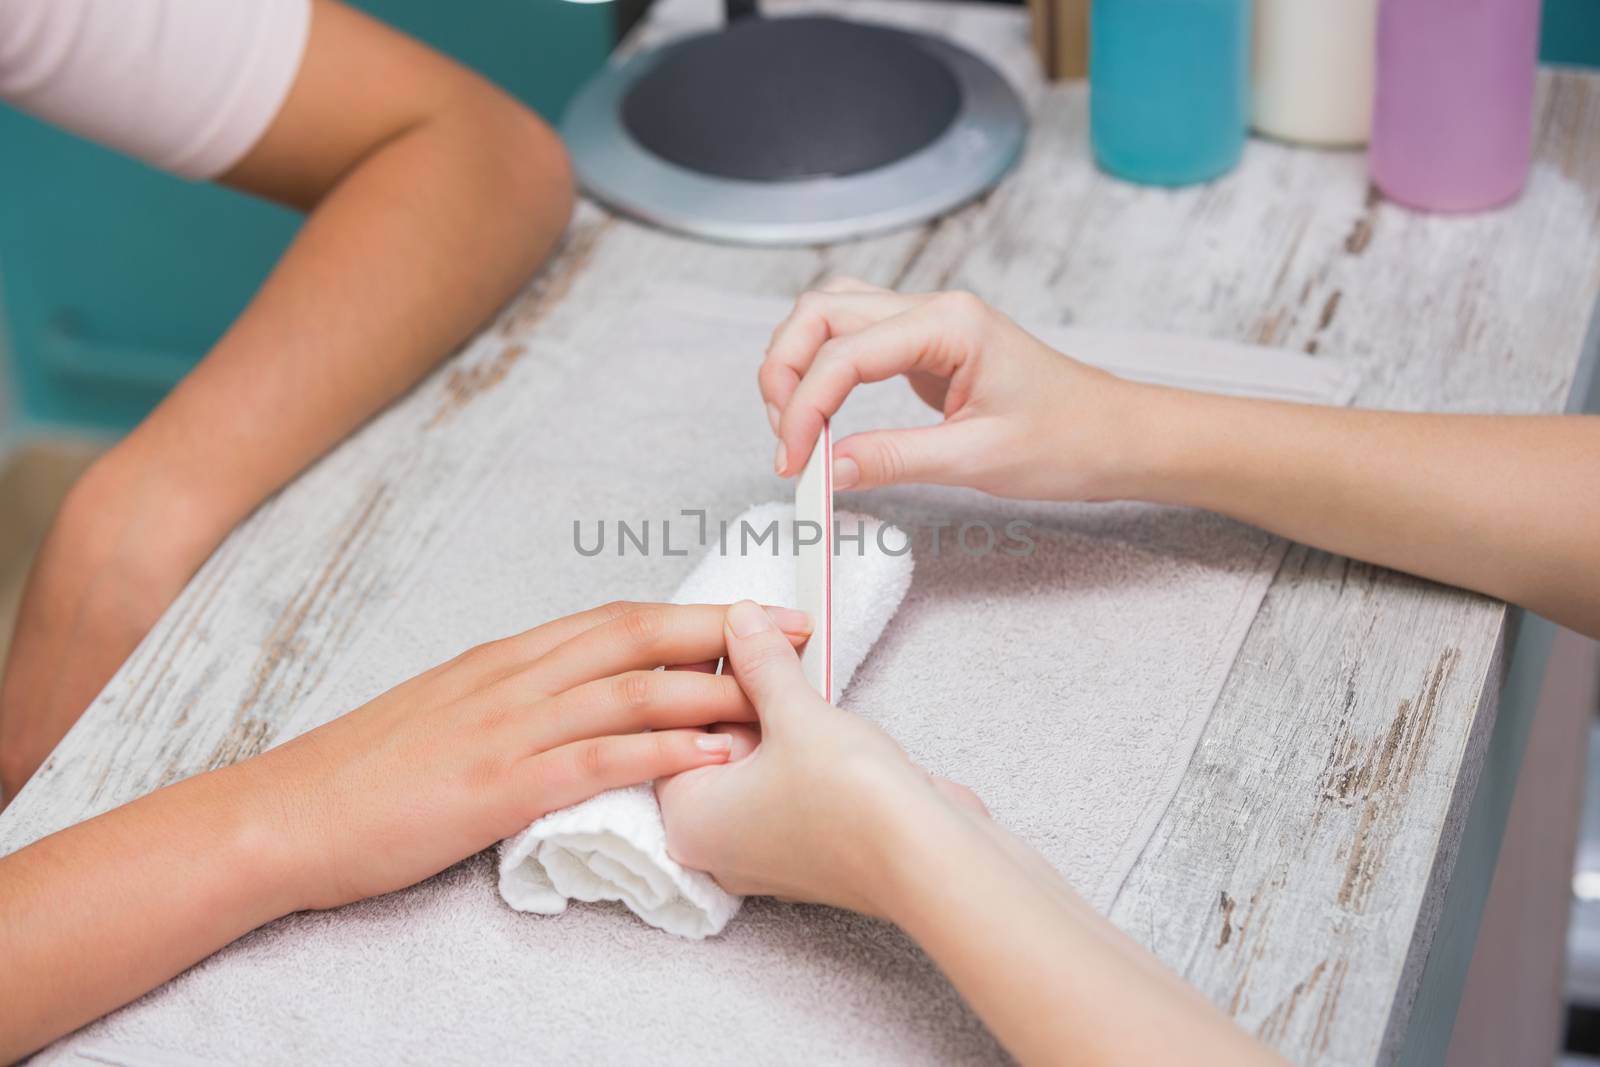 Nail technician giving manicure to customer at the beauty salon